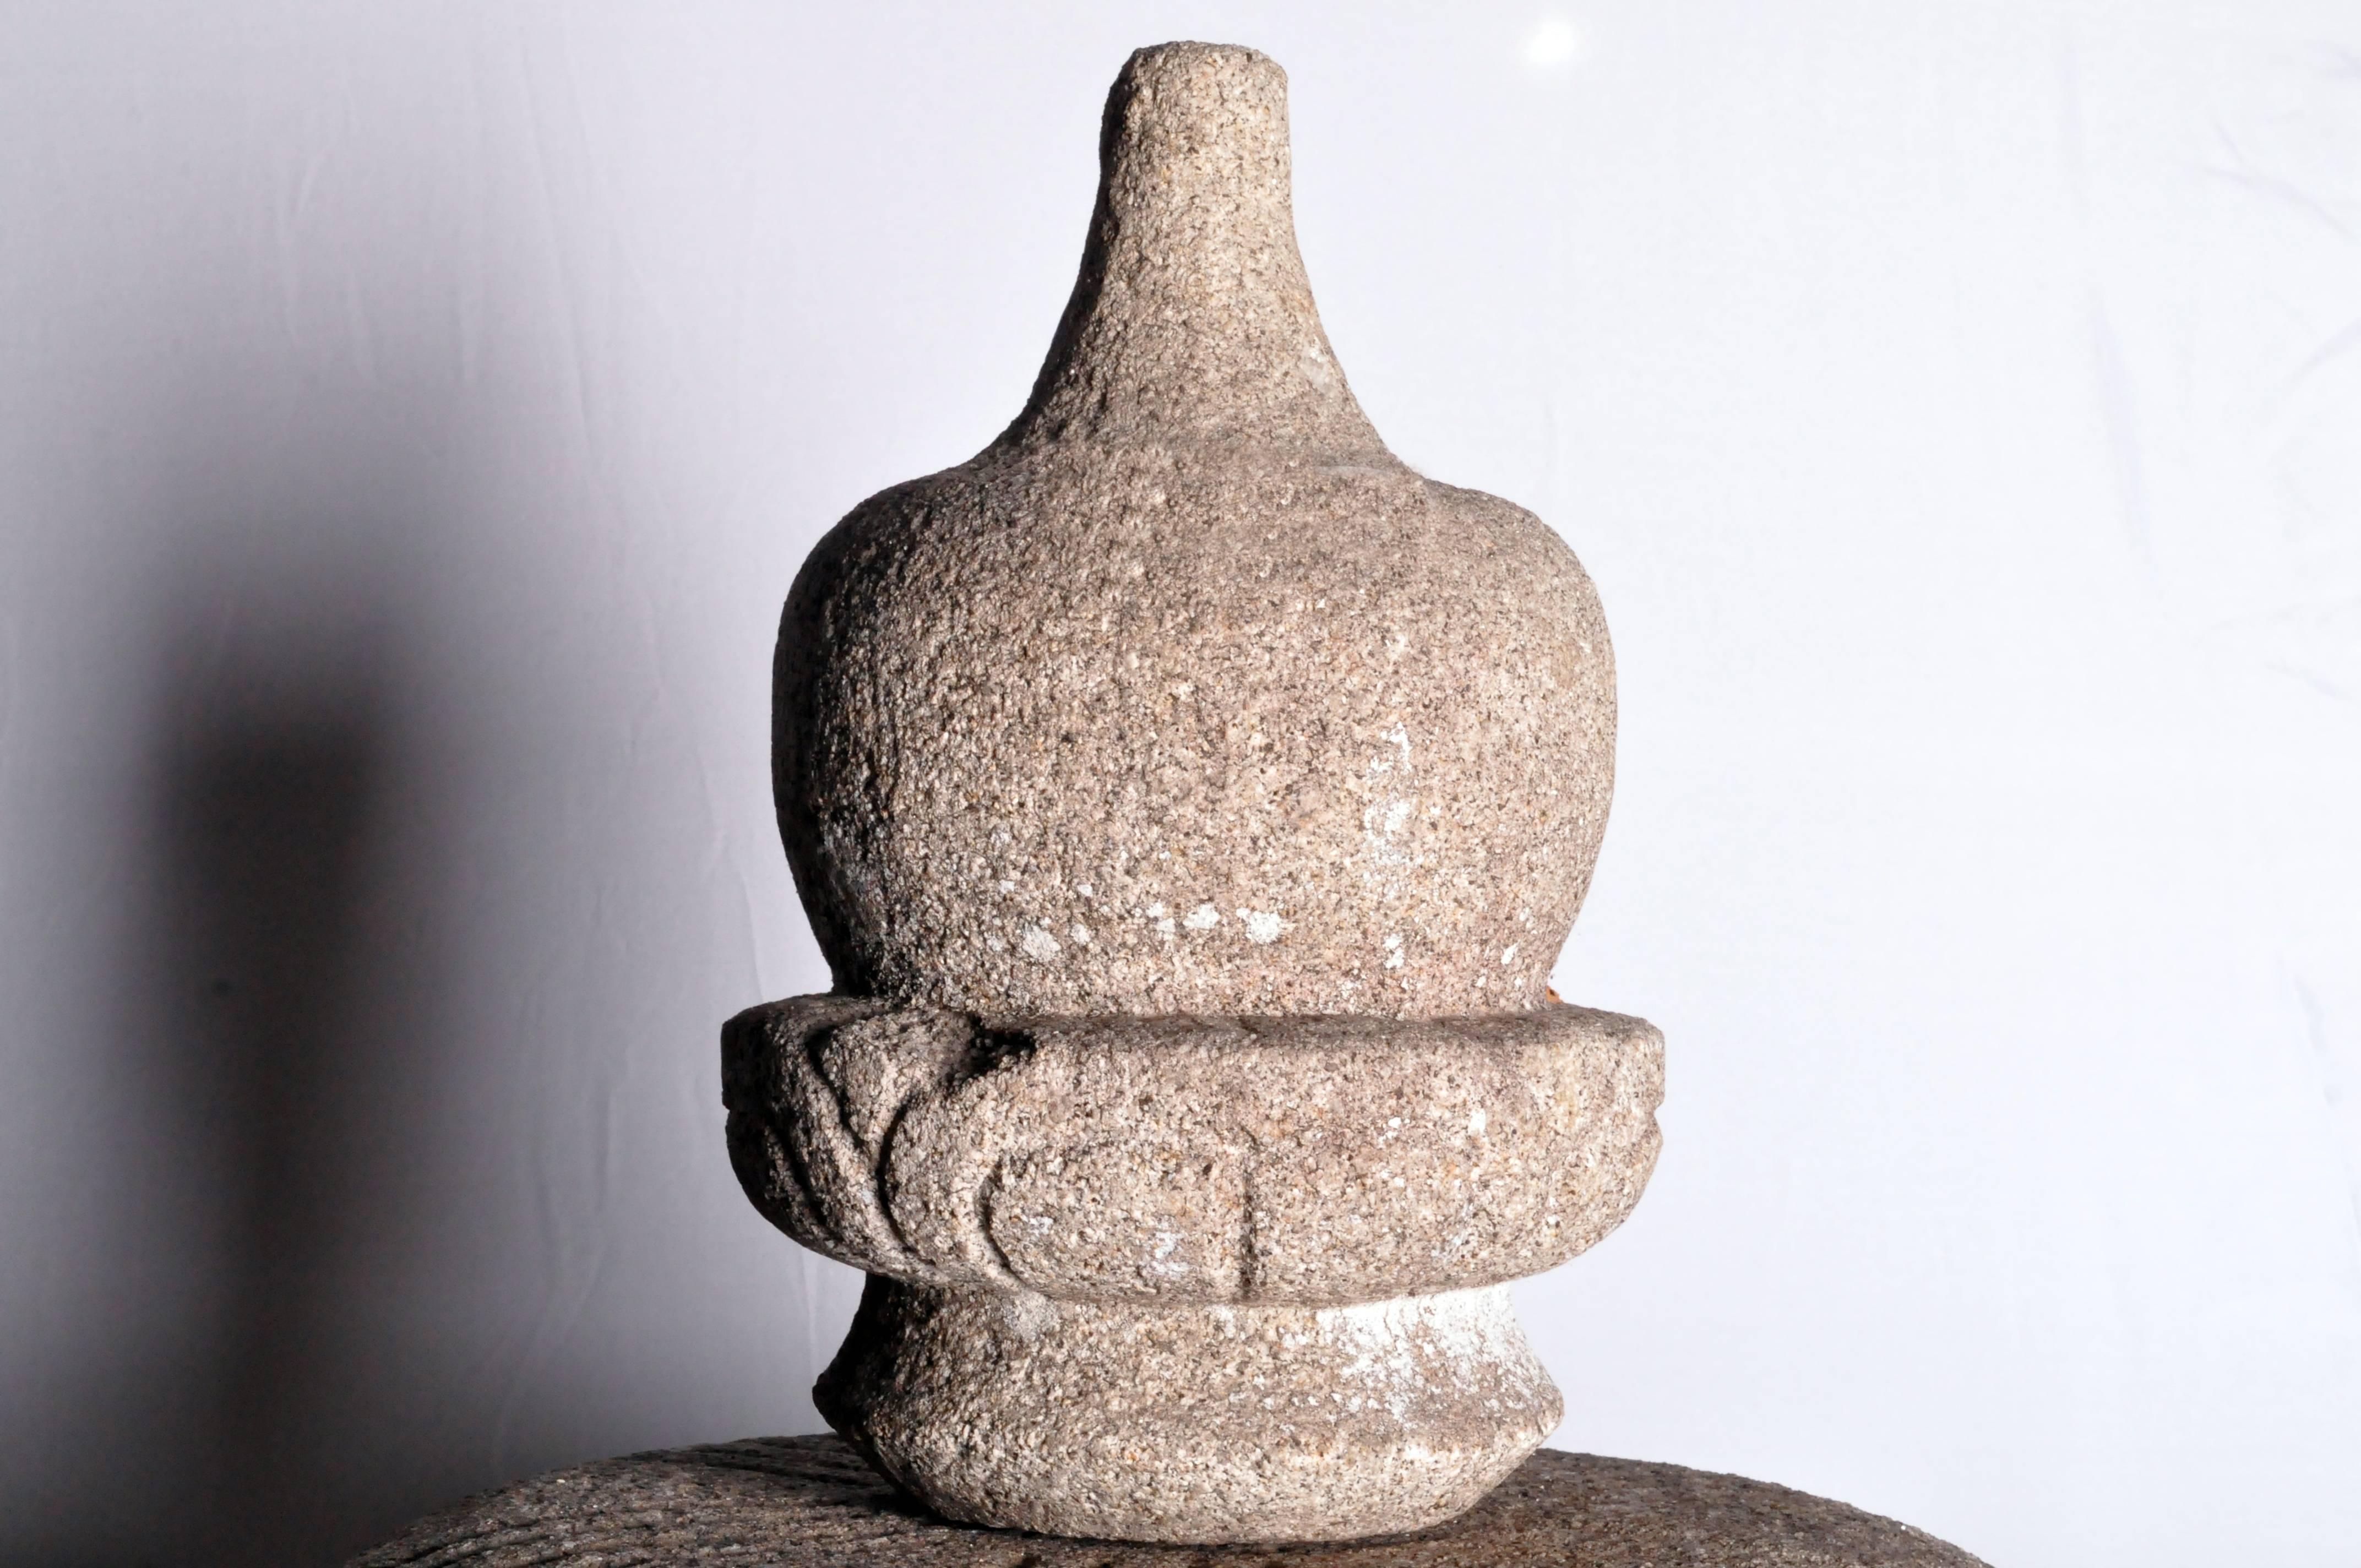 Japanese stone lanterns were first used in ancient Shinto shrines where they served as votive lights. In the 16th century Japanese tea masters included the lanterns in Buddhist tea gardens as a means to light pathways. Solid yet elegant, these